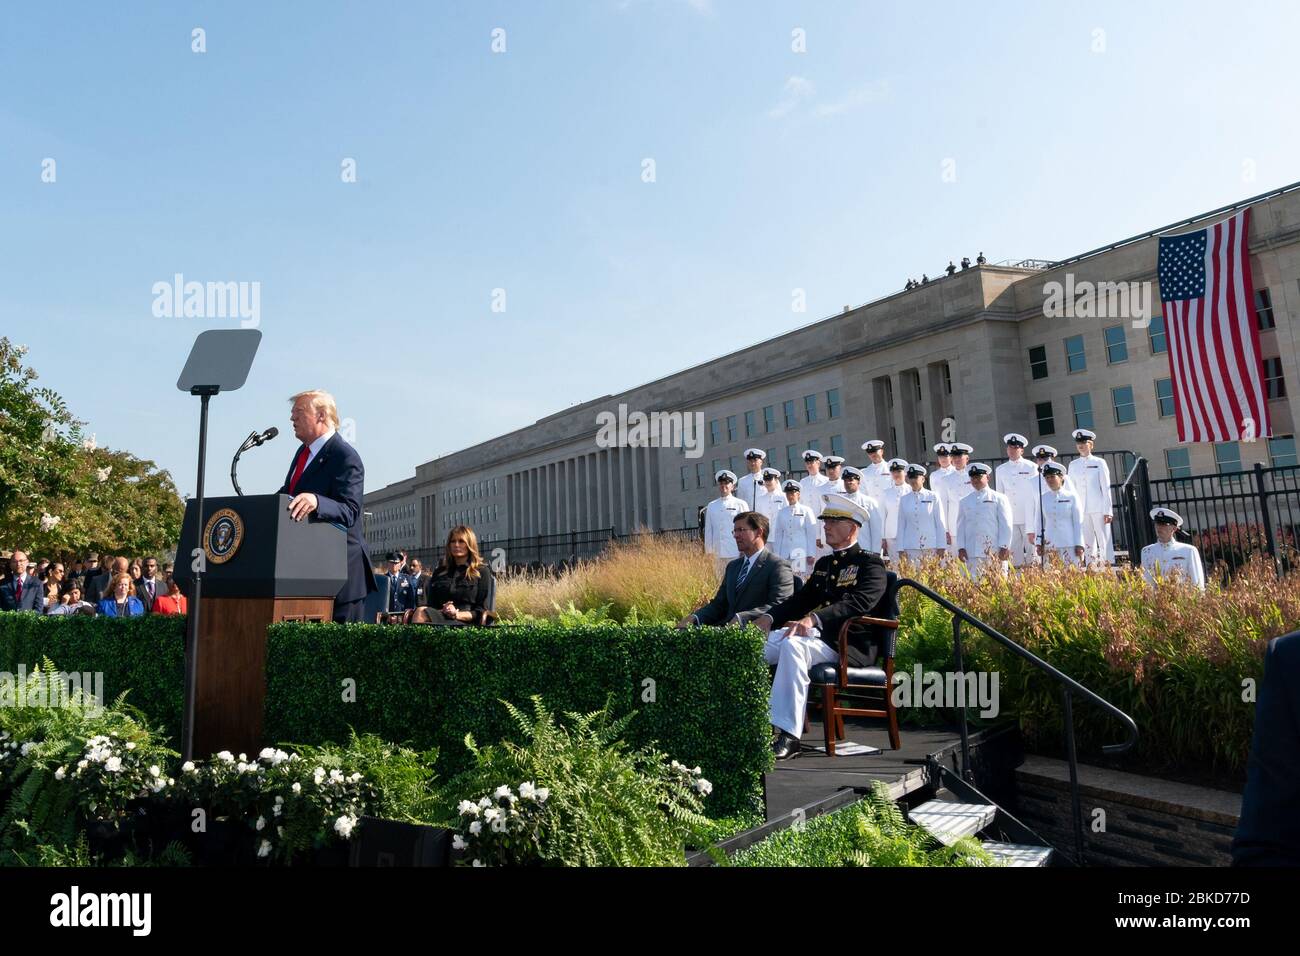 First Lady Melania Trump, the Secretary of Defense Mark Esper and the Chairman of the Joint Chiefs of Staff Gen. Joseph Dunford listen as President Donald J. Trump delivers remarks during the September 11th Pentagon Observance Ceremony Wednesday, Sept. 11, 2019, at the Pentagon in Arlington, Va. September 11 Stock Photo